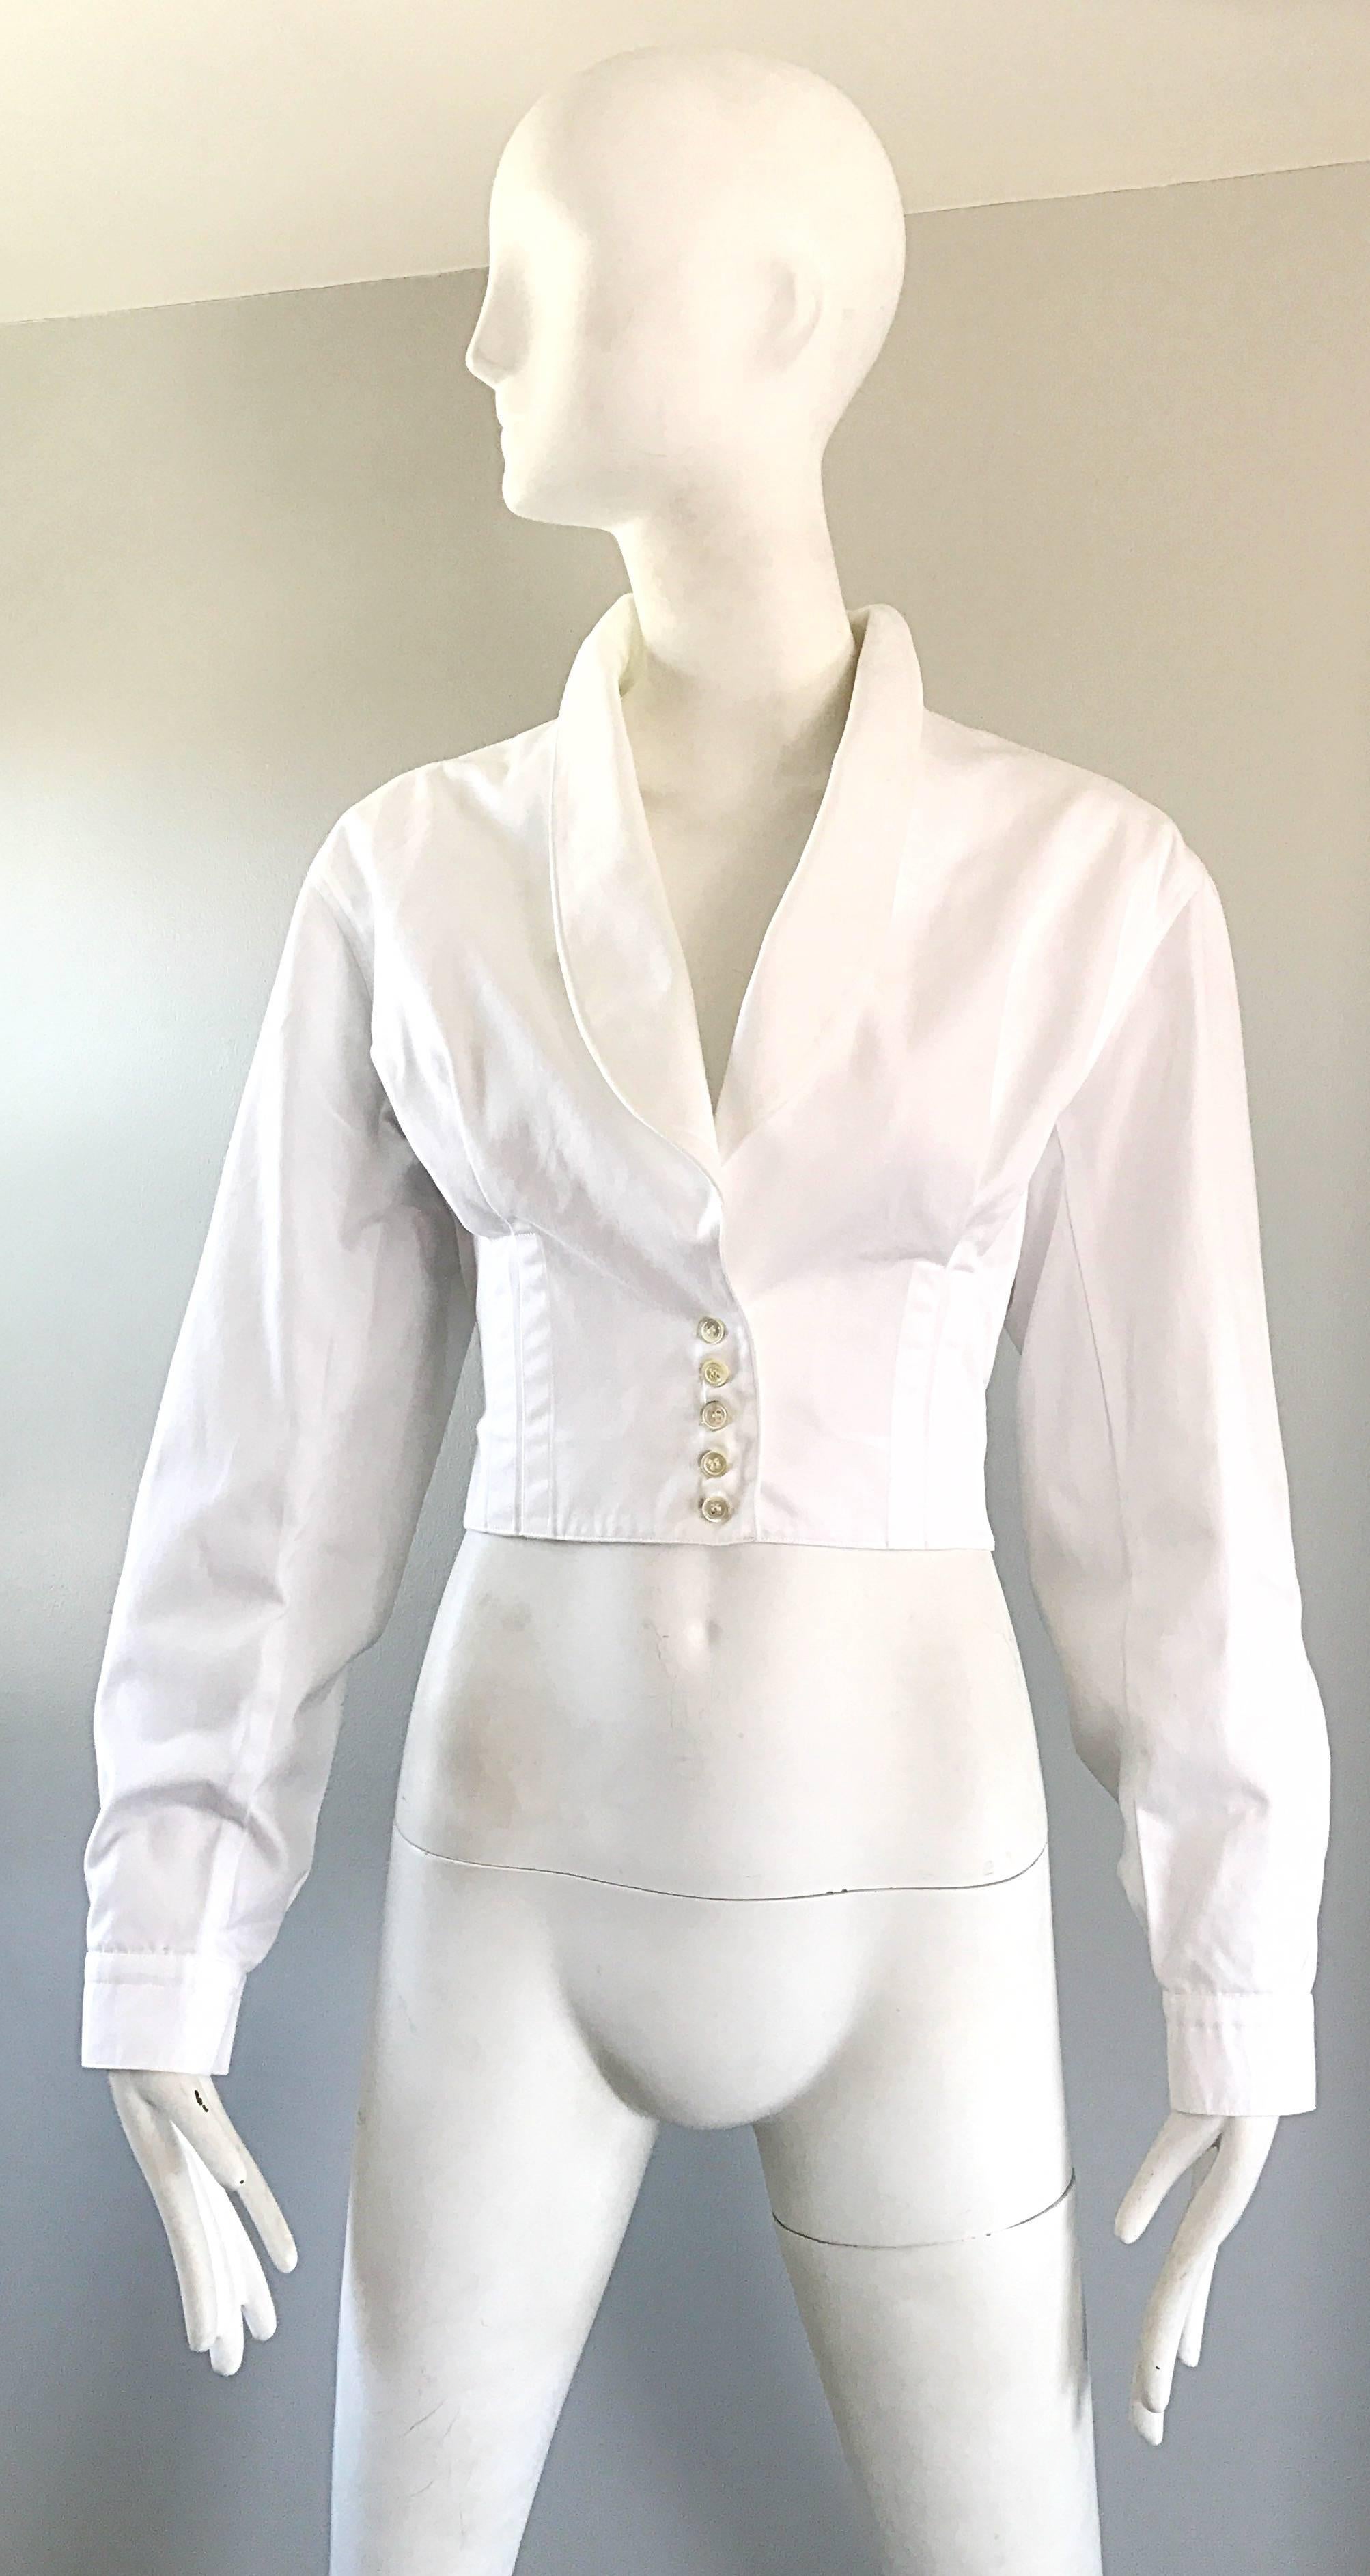 Exceptional vintage AZZEDINE ALAIA white cotton tailored cropped jacket! Featureas signature Alaia flattering curves that provide an extra slimming effect. Five buttons up the front, and buttons at each sleeve cuff. Chic shawl collar. Can easily be